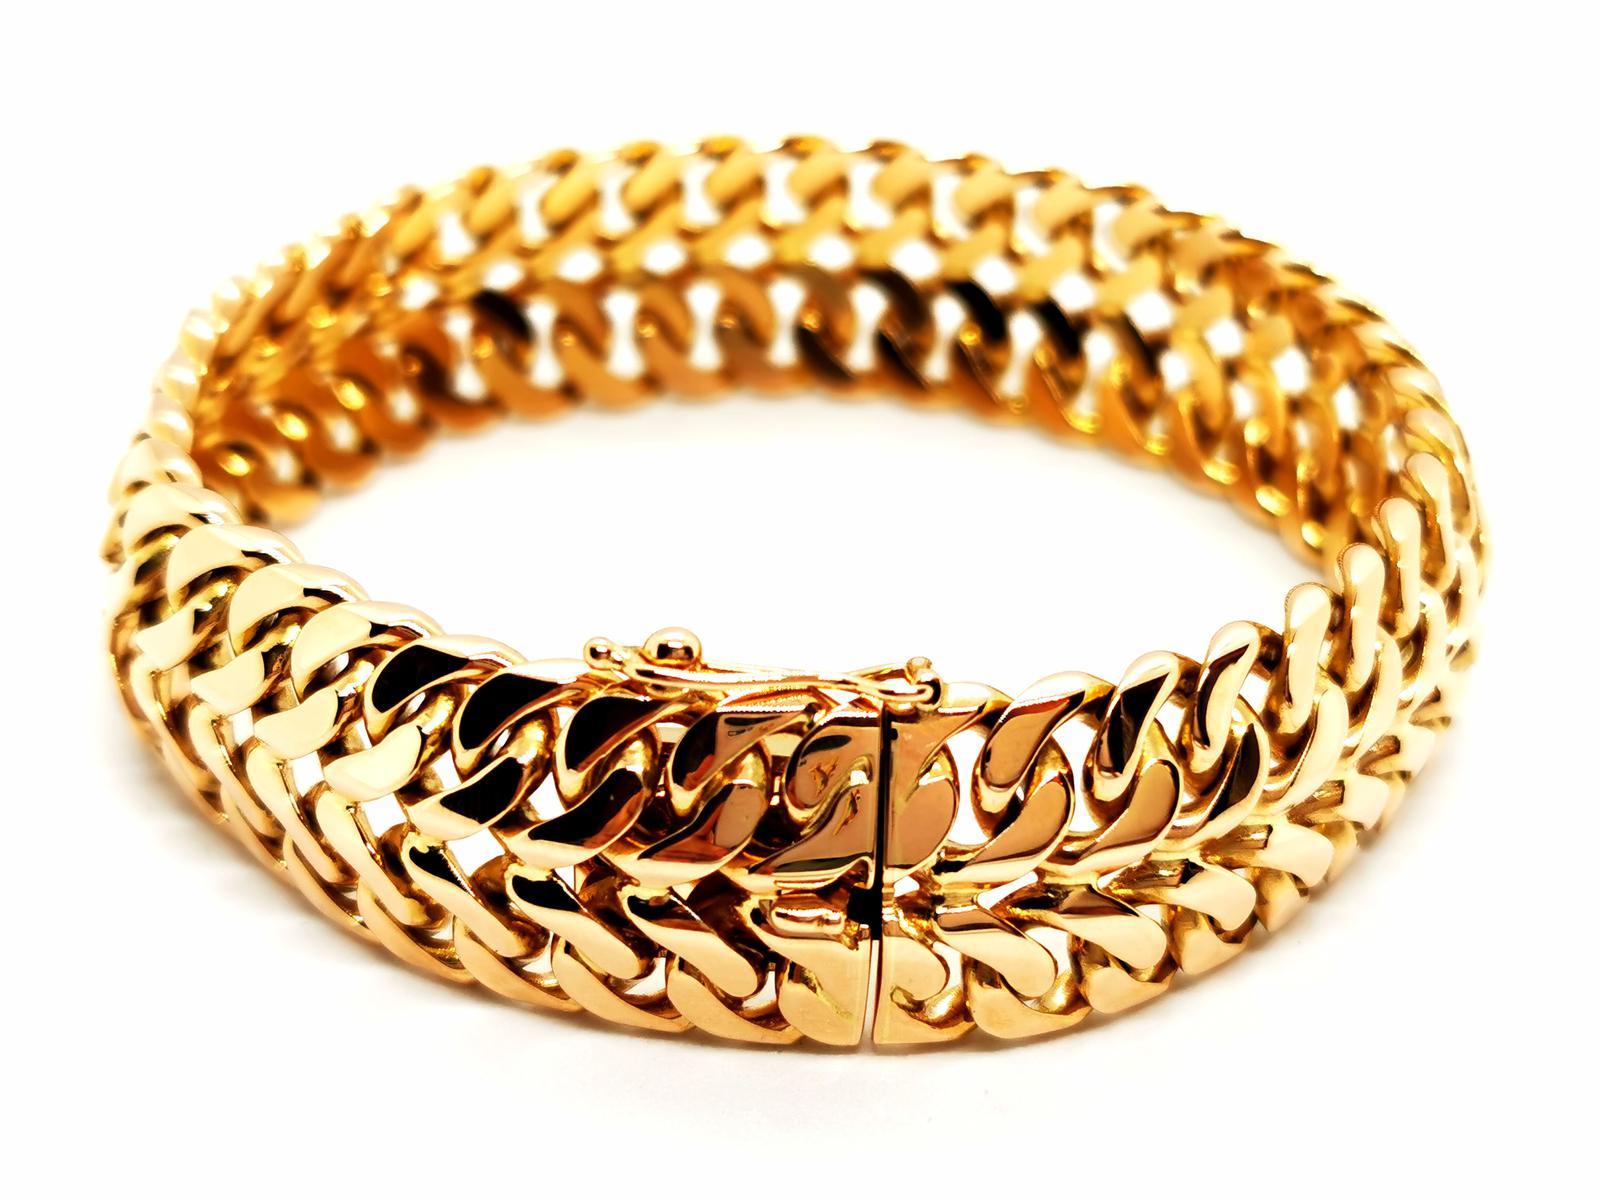 Bracelet cuff in Yellow Gold 750 thousandths (18 carats). double gourmet mesh. length: 9 cm. width: 1.5 cm. depth: 0.6 cm. clasp with a safety eight. total weight: 70.21 g. hallmark. excellent condition.
